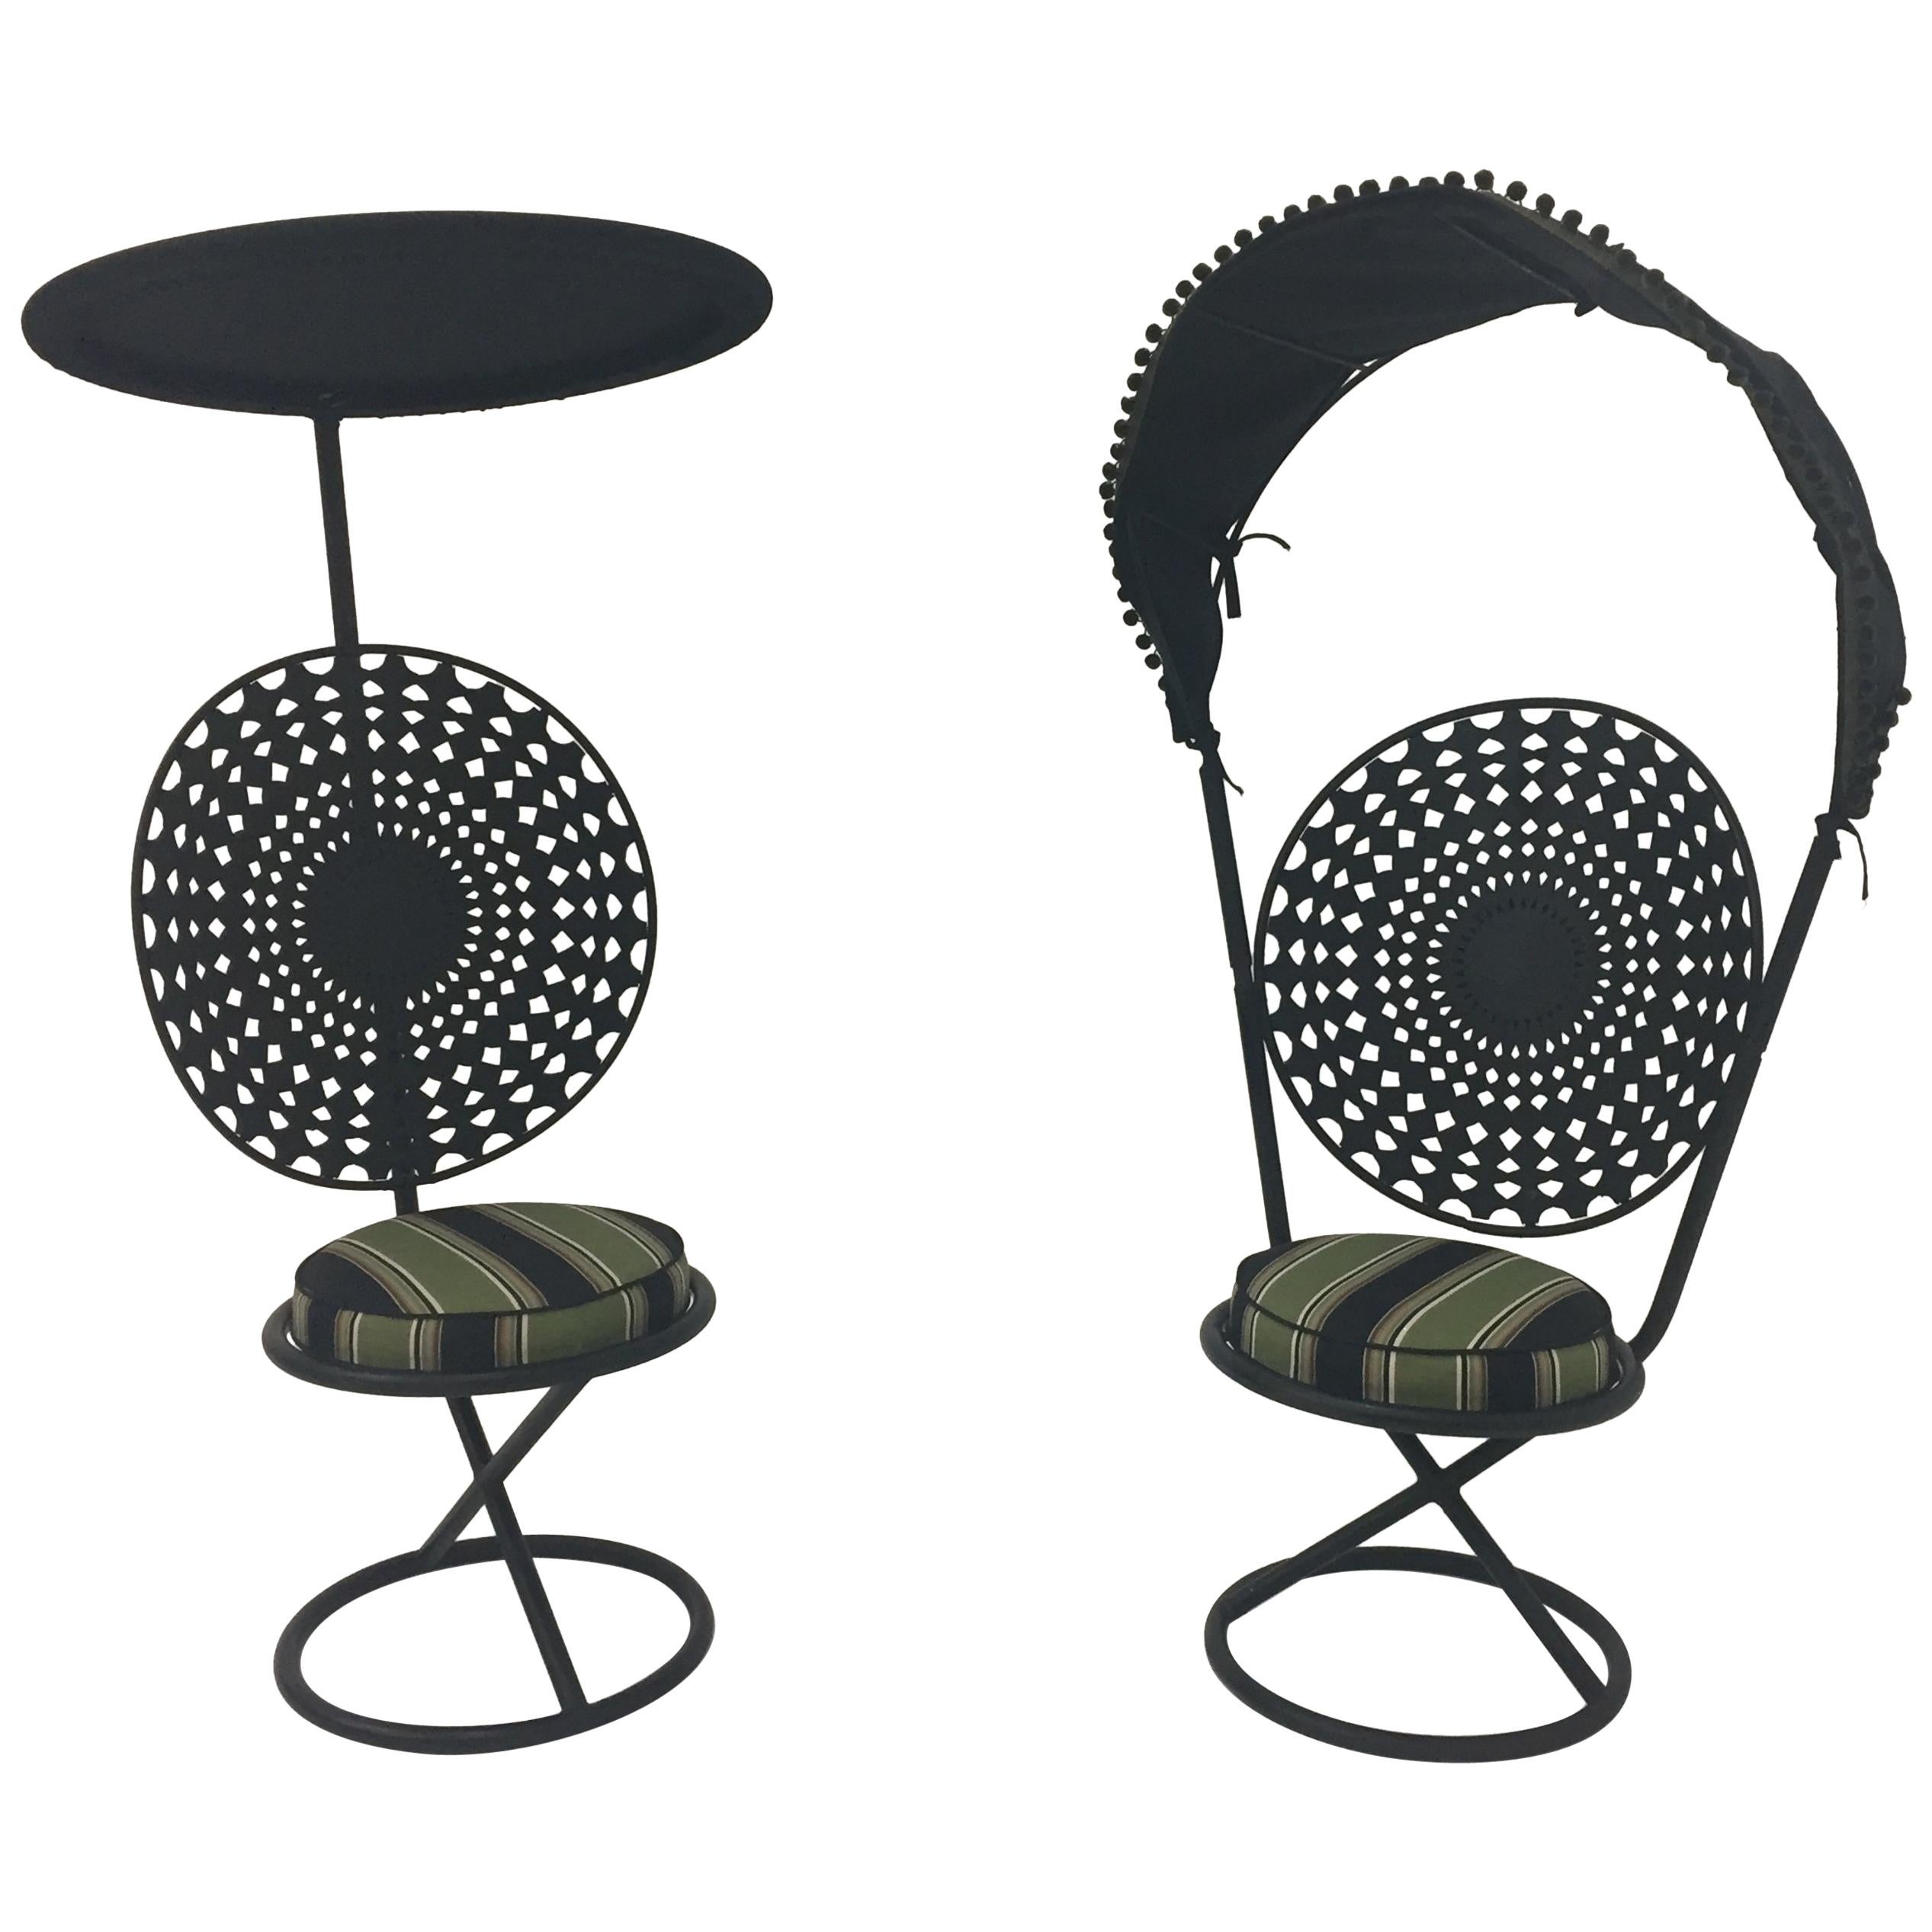 Pair of Italian Riviera Chic Outdoor Enameled Steel Canopy Chairs